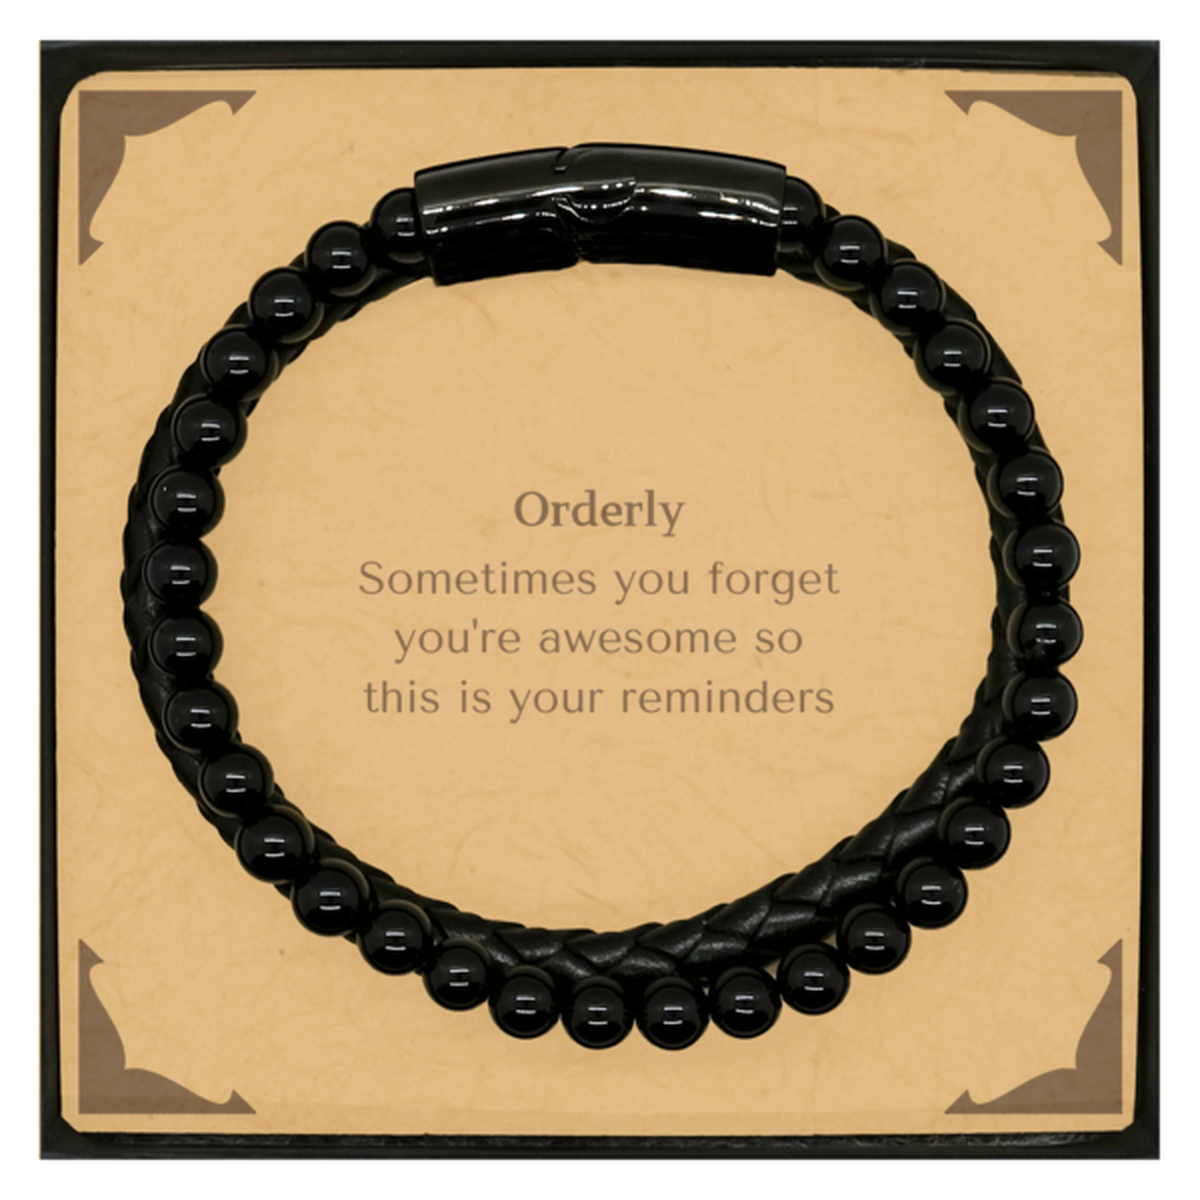 Sentimental Orderly Stone Leather Bracelets, Orderly Sometimes you forget you're awesome so this is your reminders, Graduation Christmas Birthday Gifts for Orderly, Men, Women, Coworkers